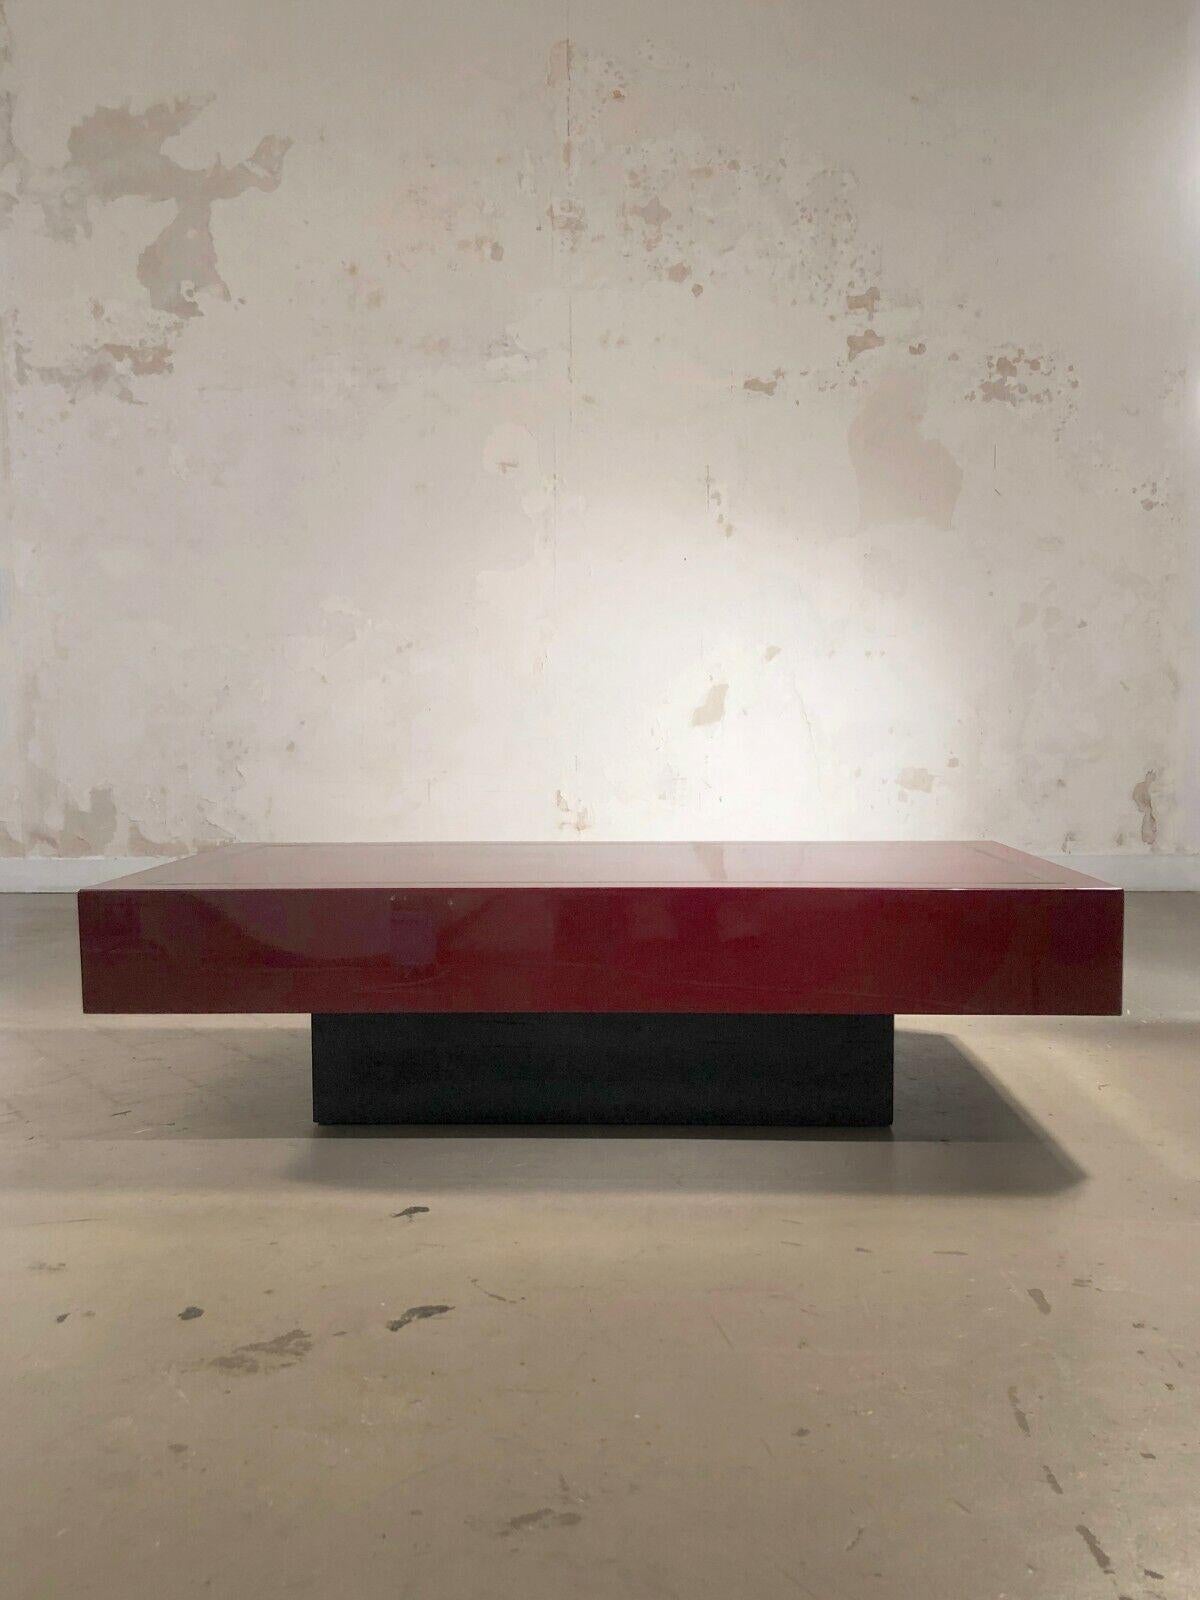 An elegant and luxurious rectangular coffee table, Post-Modernist, Shabby-Chic, base in black lacquered wood, thick square section top in burgundy red lacquered wood (deep and intense Chinese color) enhanced by a gilded brass frame, Jean-Claude